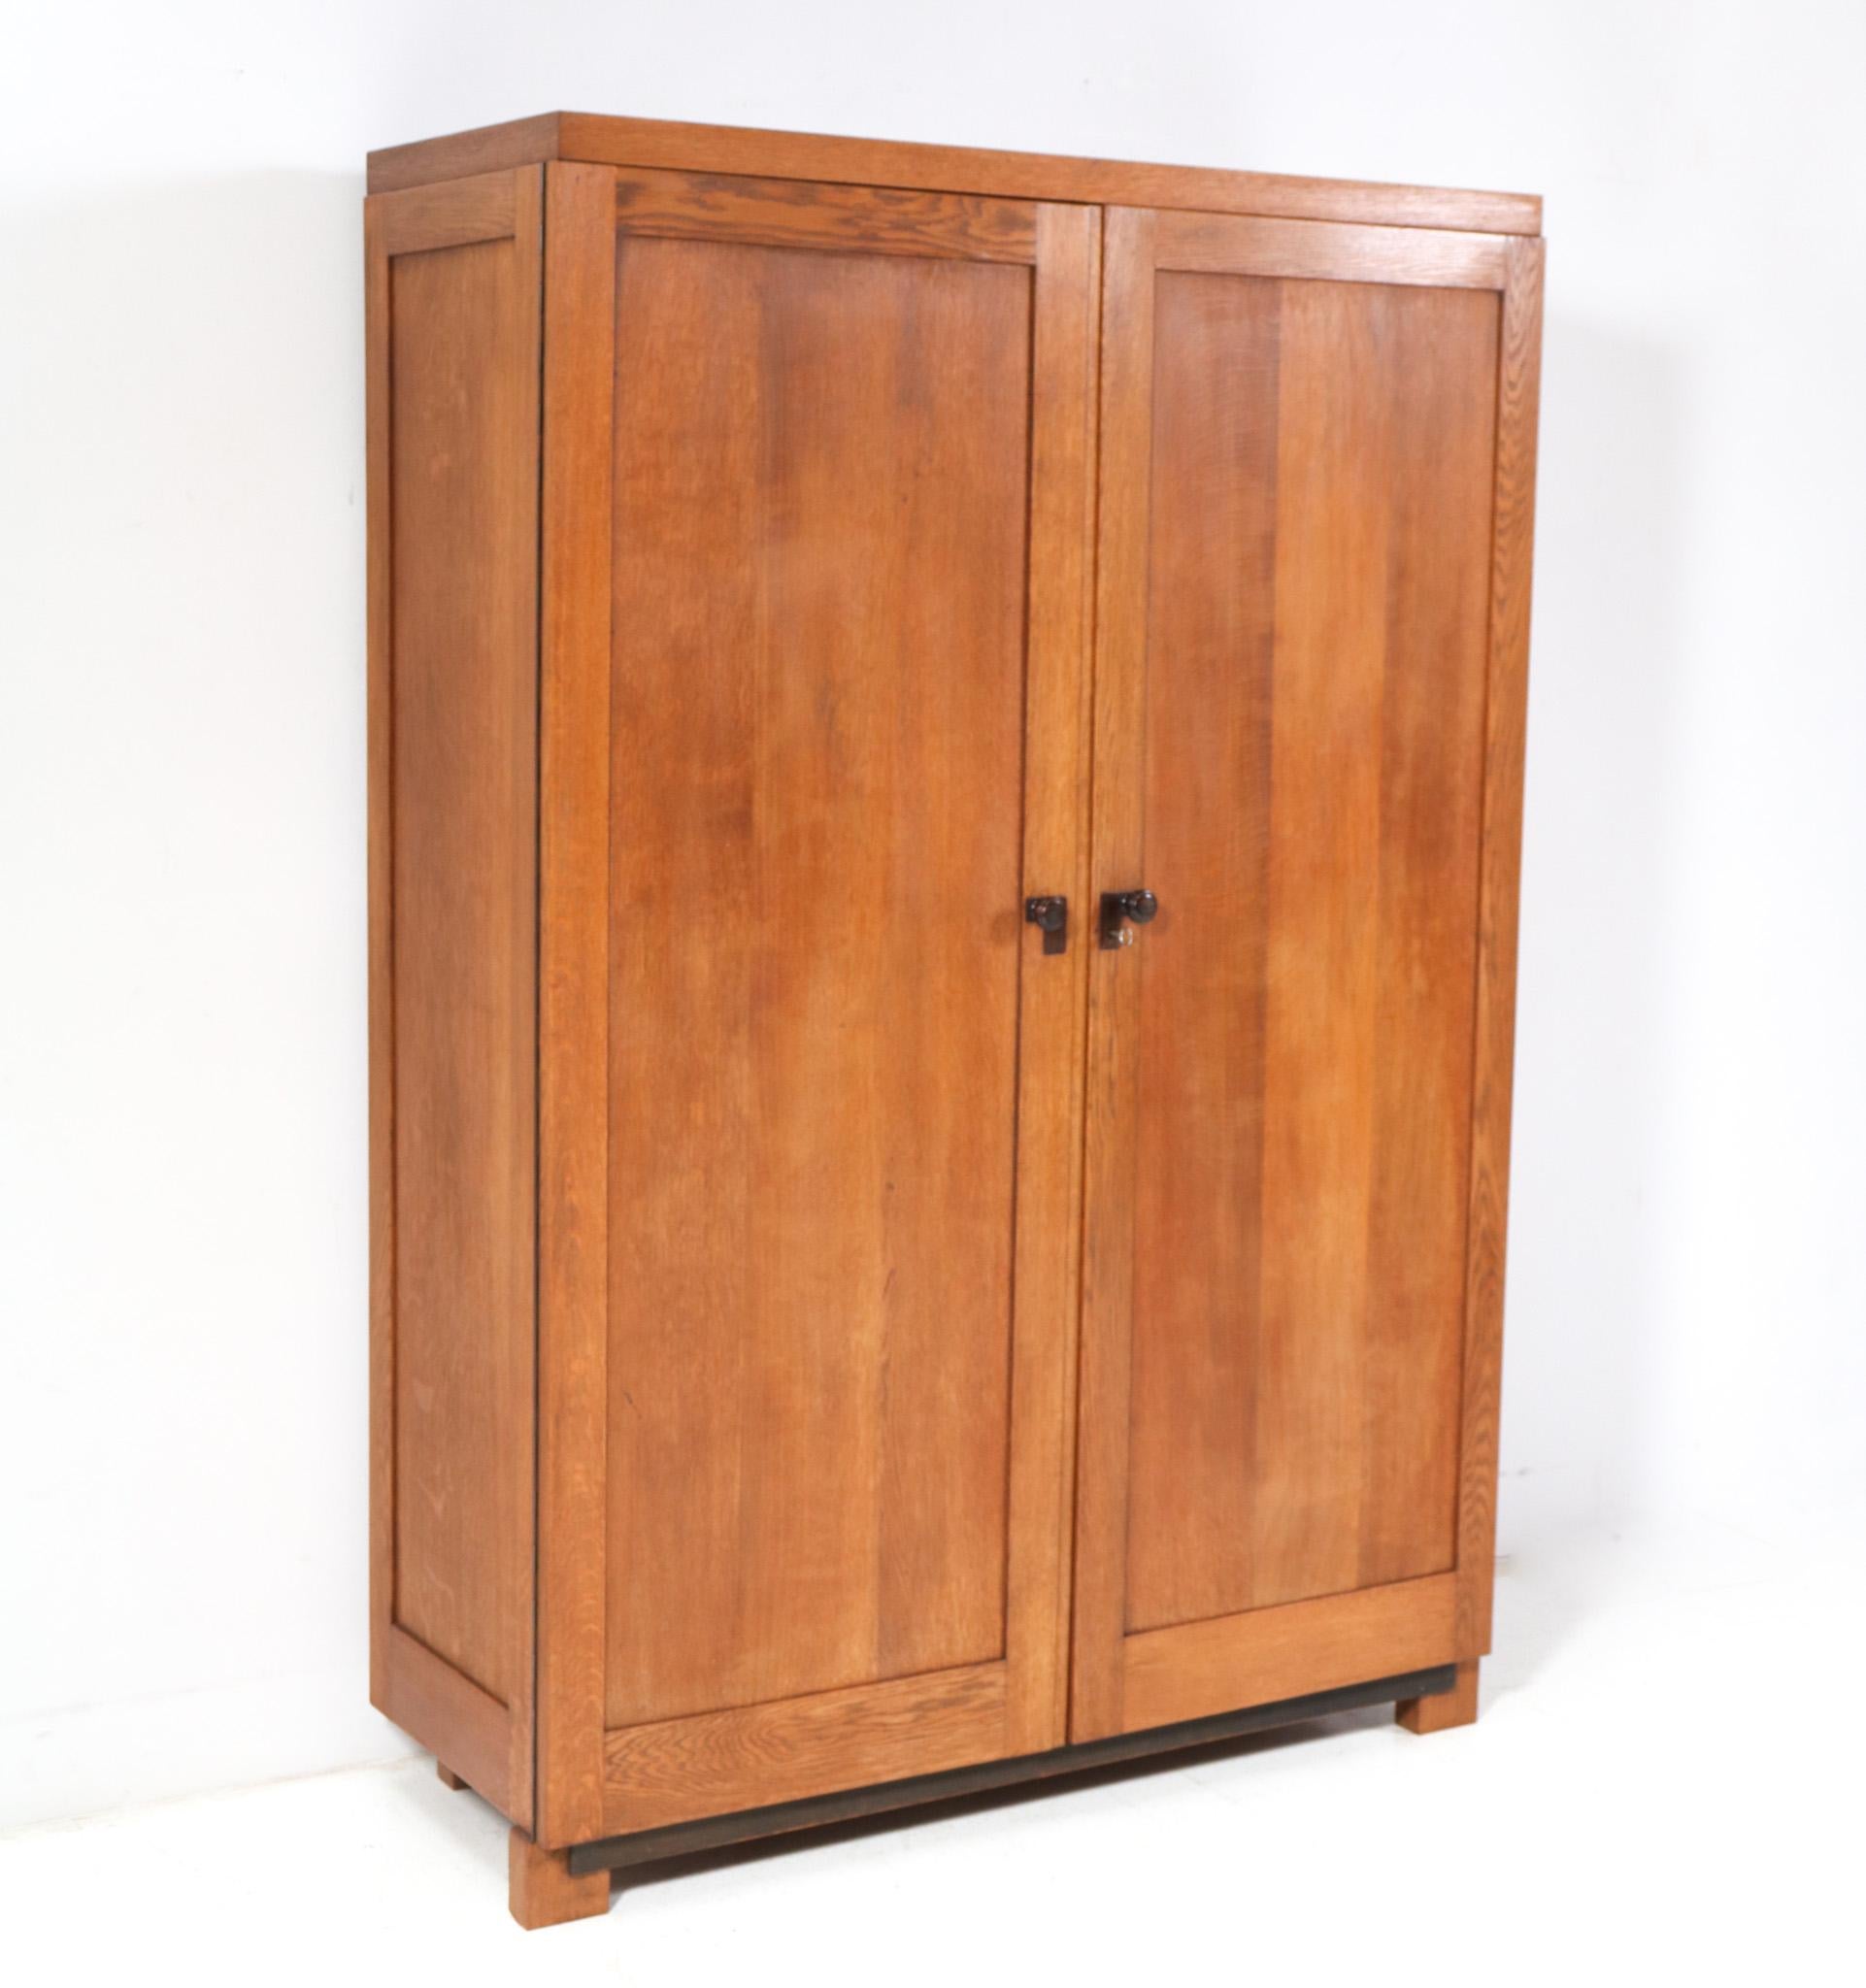 Magnificent and rare Art Deco Modernist armoire or wardrobe.
Striking Dutch design from the 1920s.
Solid oak base with original solid macassar ebony knobs on both doors.
Seven original solid oak shelves.
The top has also two original brass rods for